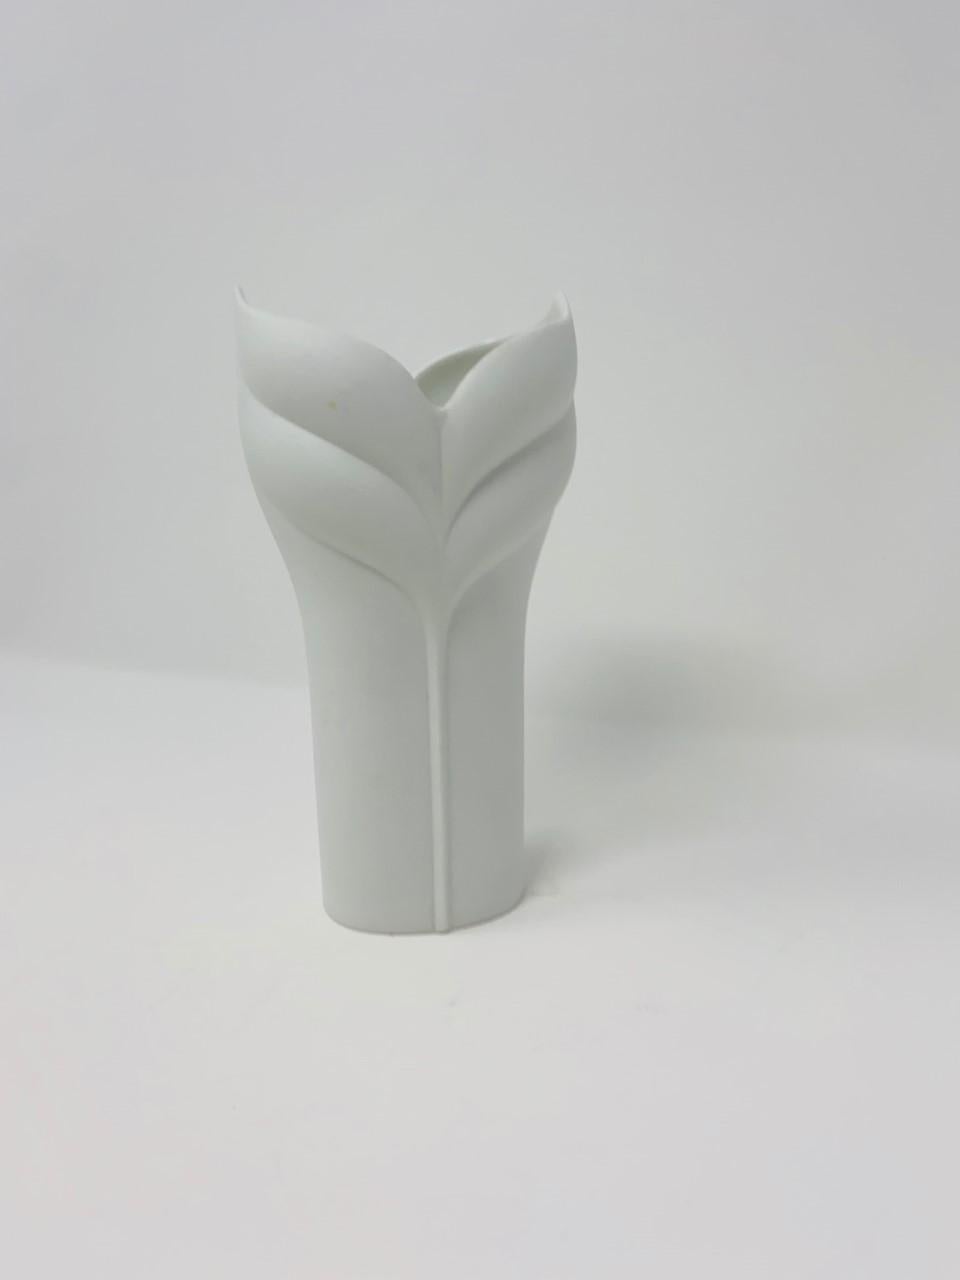 Mid-Century Modern Vintage White Bisque Op Art Vase by Uta Feyl for Rosenthal For Sale